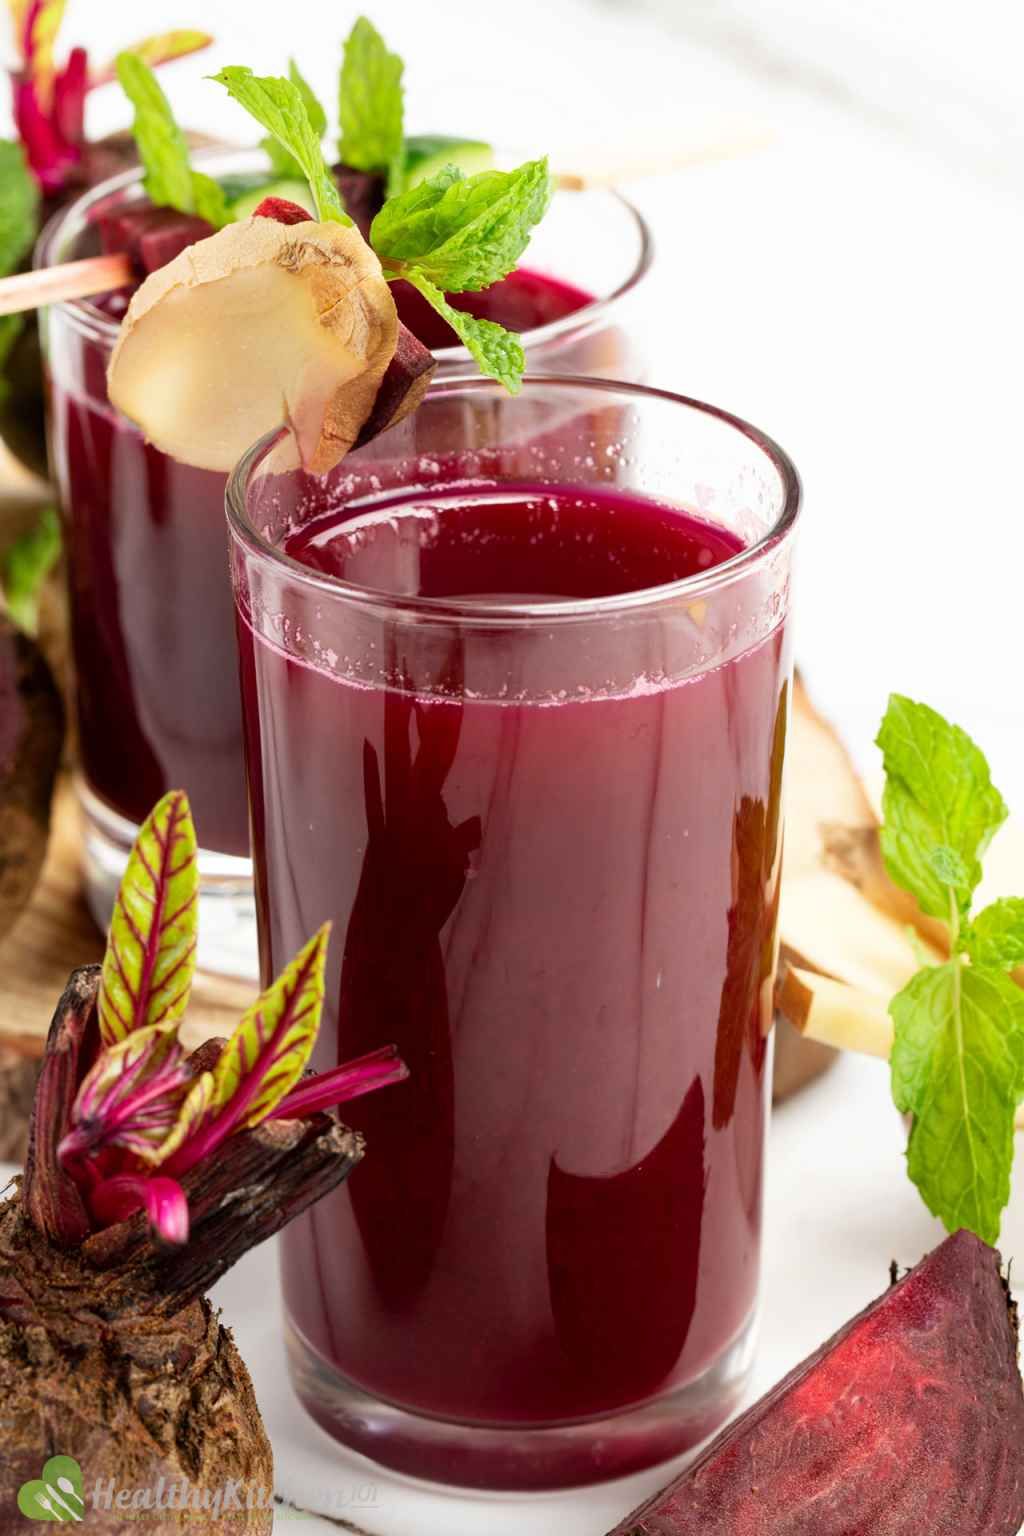 Top 10 Beet Juice Recipes to Reduce Brain Fog and Unwanted Fat